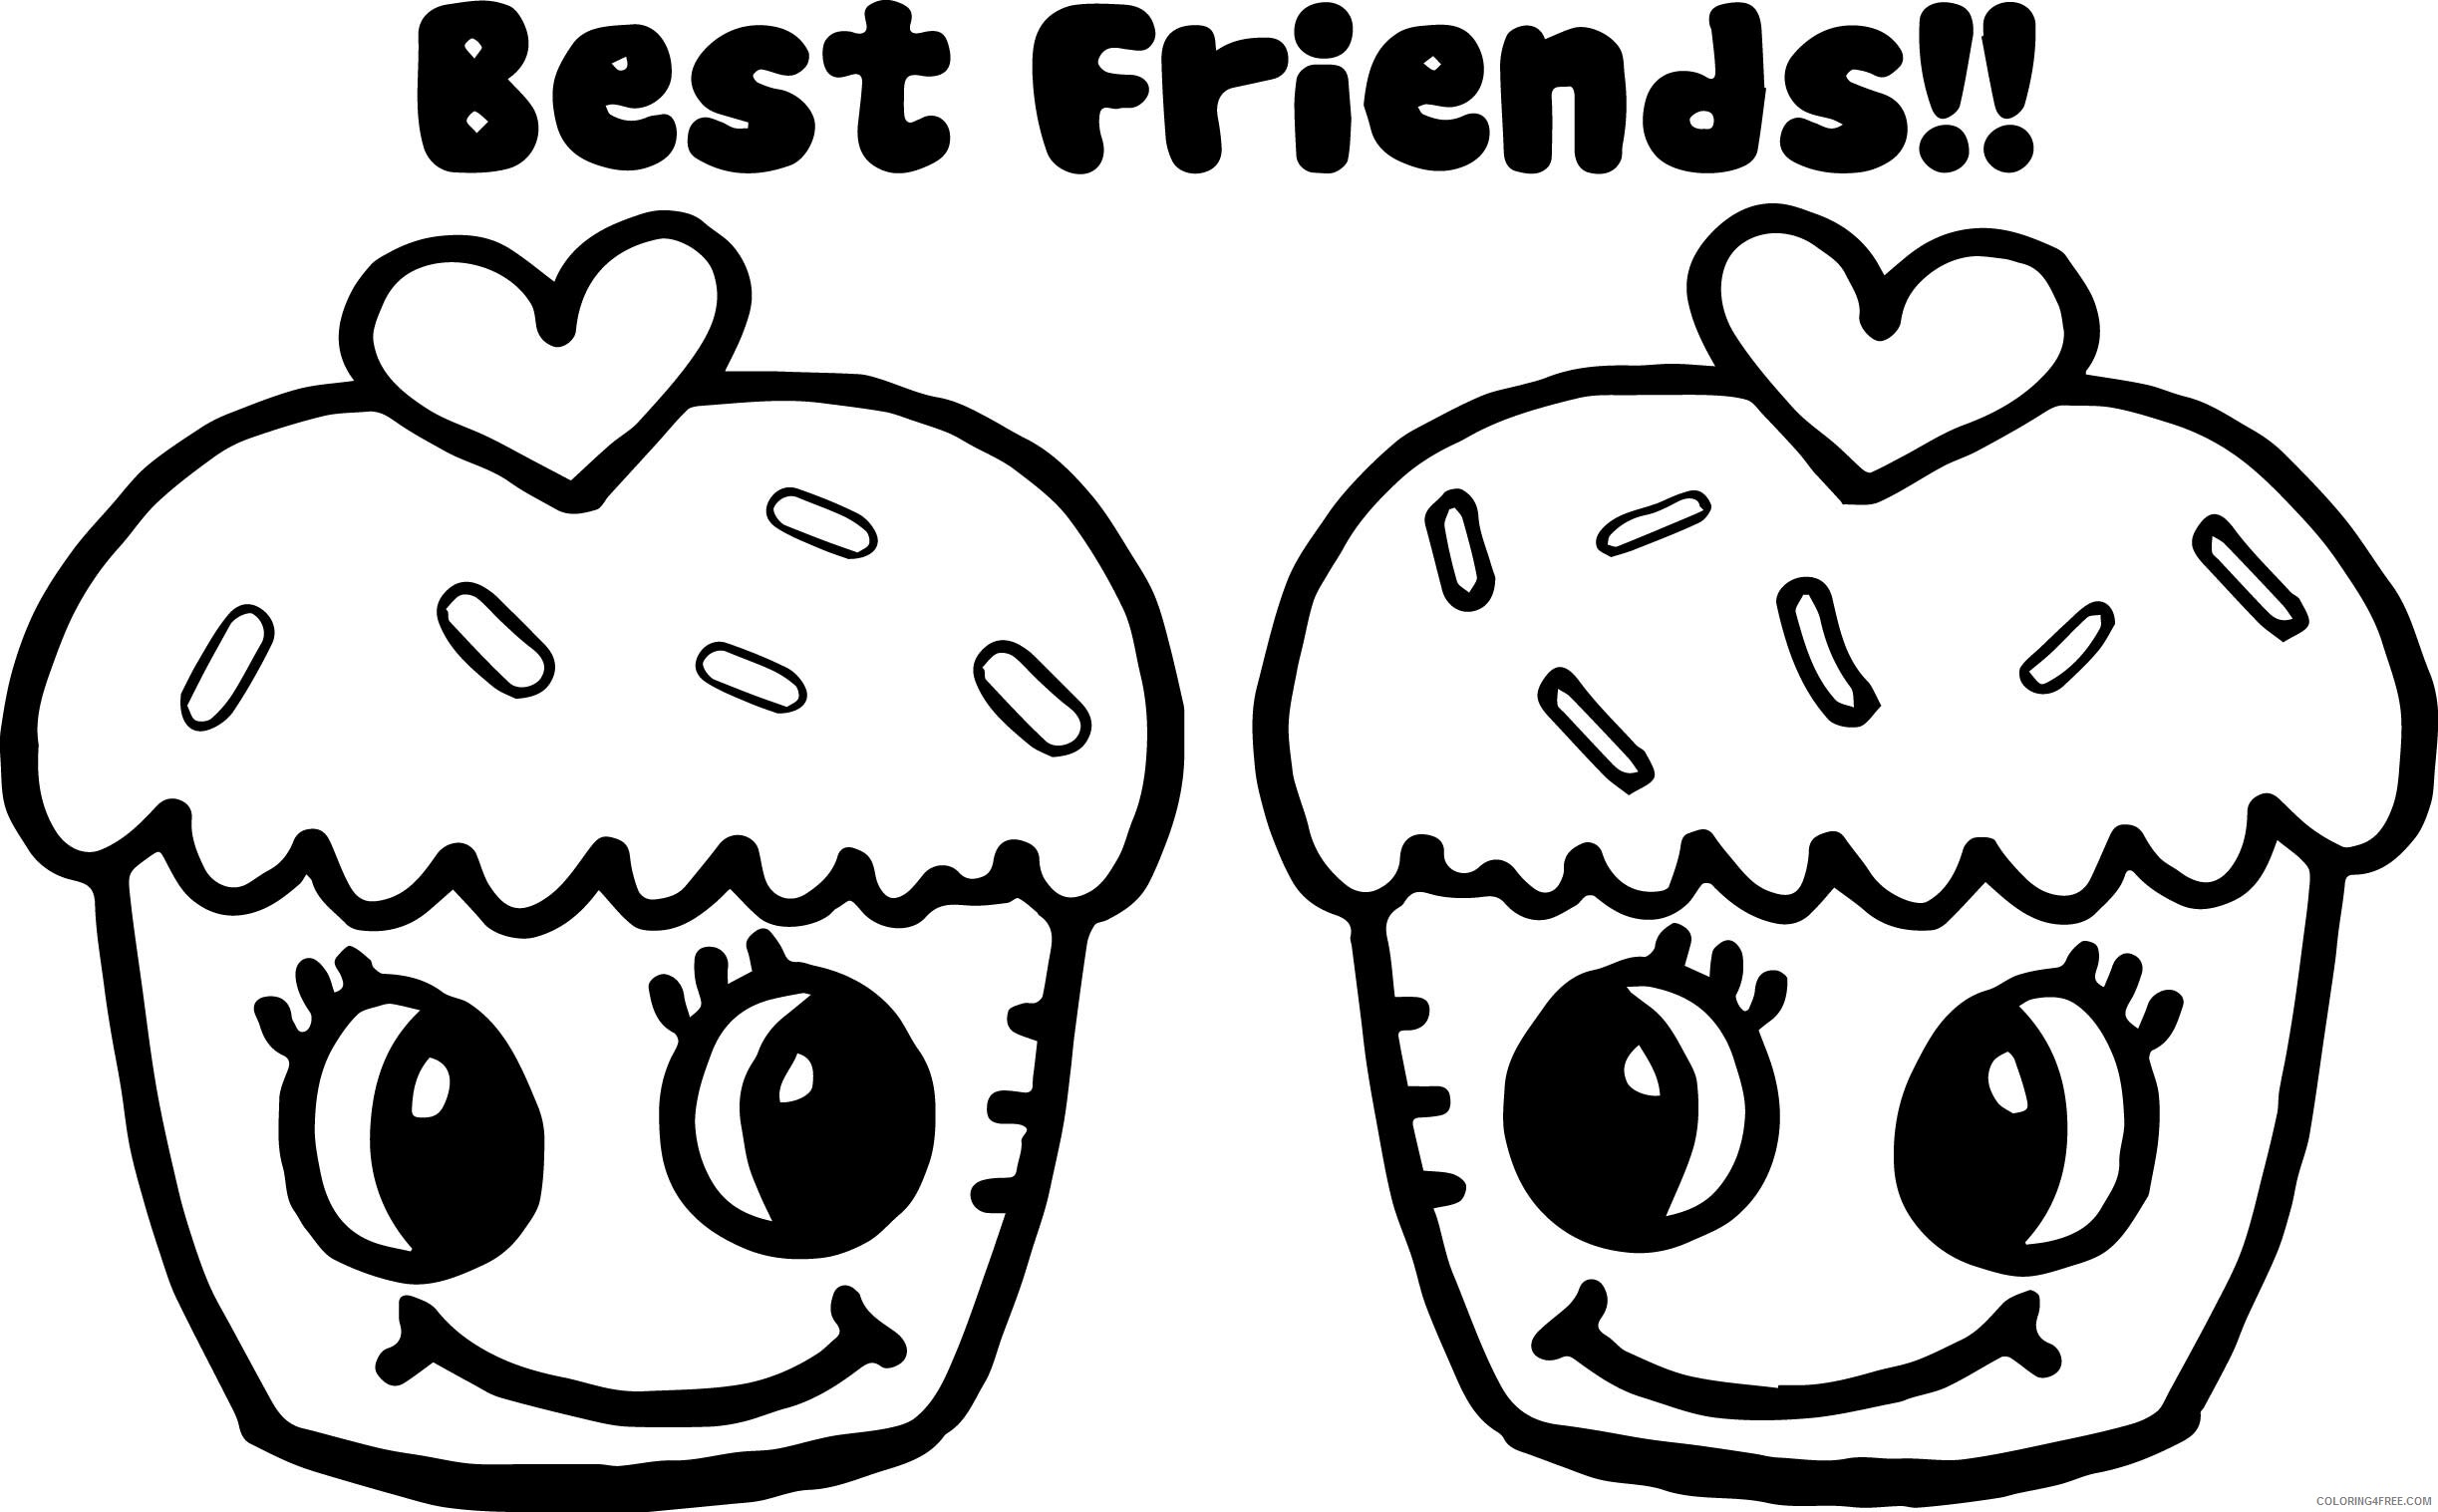 Best Friend Coloring Pages Cute Best Friends Printable 2021 0894 Coloring4free